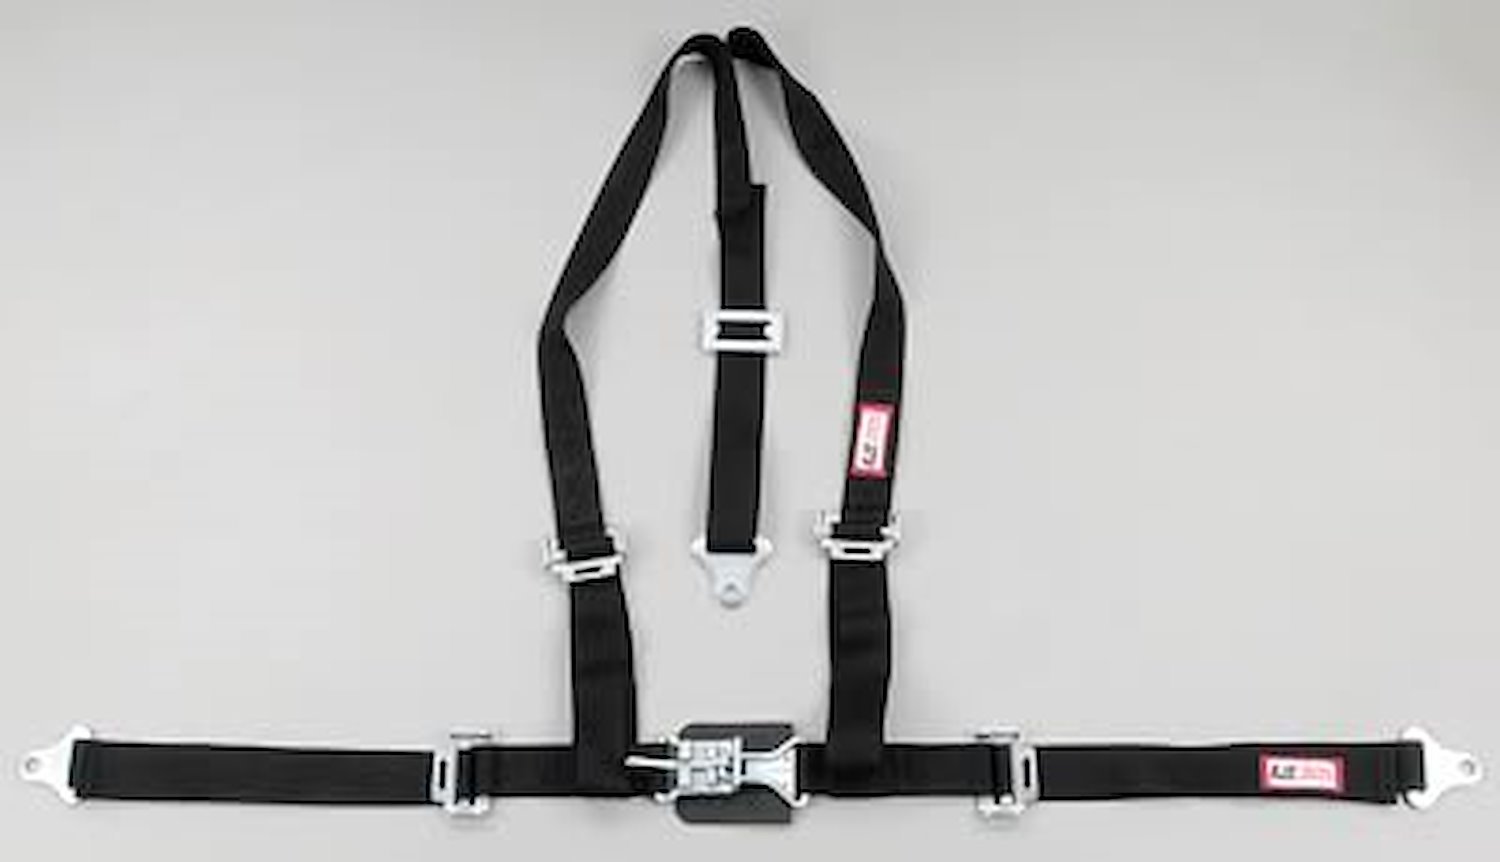 NON-SFI L&L HARNESS 2 PULL UP Lap Belt SNAP SEWN IN 2 S.H. INDIVIDUAL FLOOR Mount w/STERNUM STRAP WRAP/SNAP BLACK